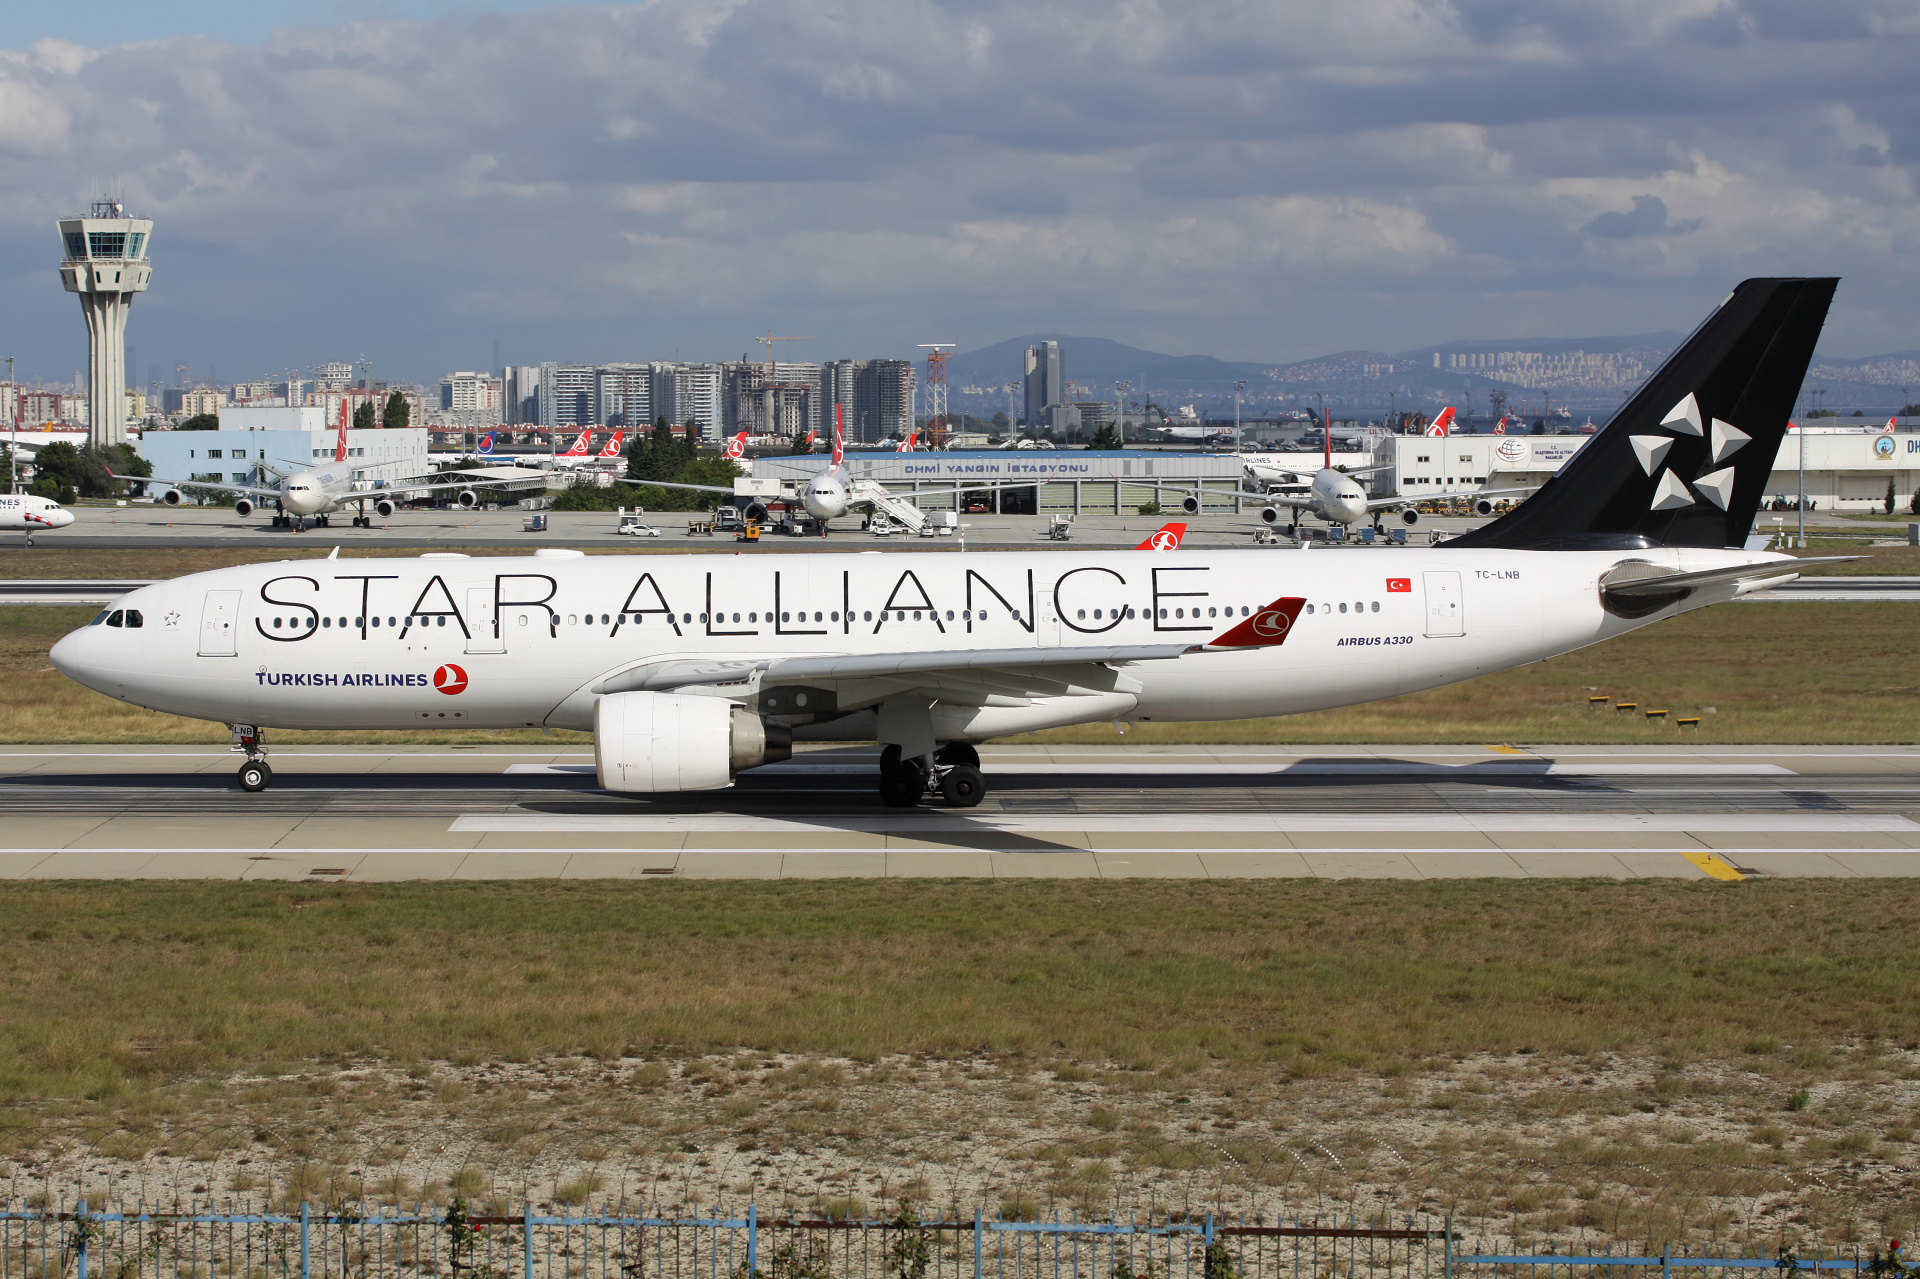 TC-LNB (Star Alliance livery) (Aircraft » Istanbul Atatürk Airport » Airbus A330-200 » THY Turkish Airlines)